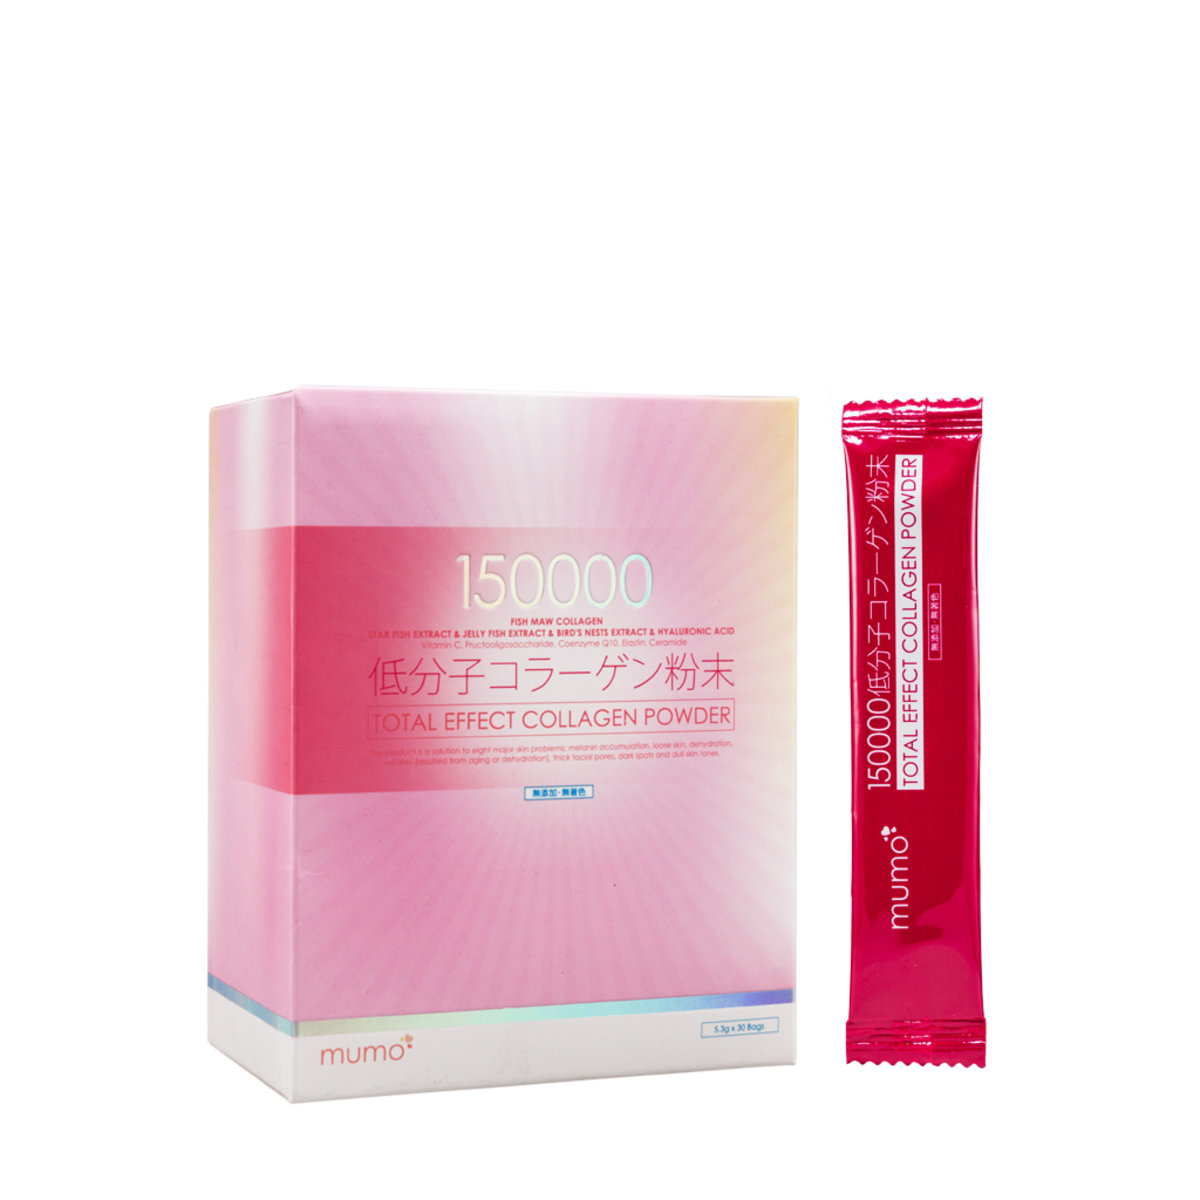 mumo®150,000mg Total Effect Collagen Powder (Collagen from Fish Maw, 3 Patented Ingredients) (30pcs)